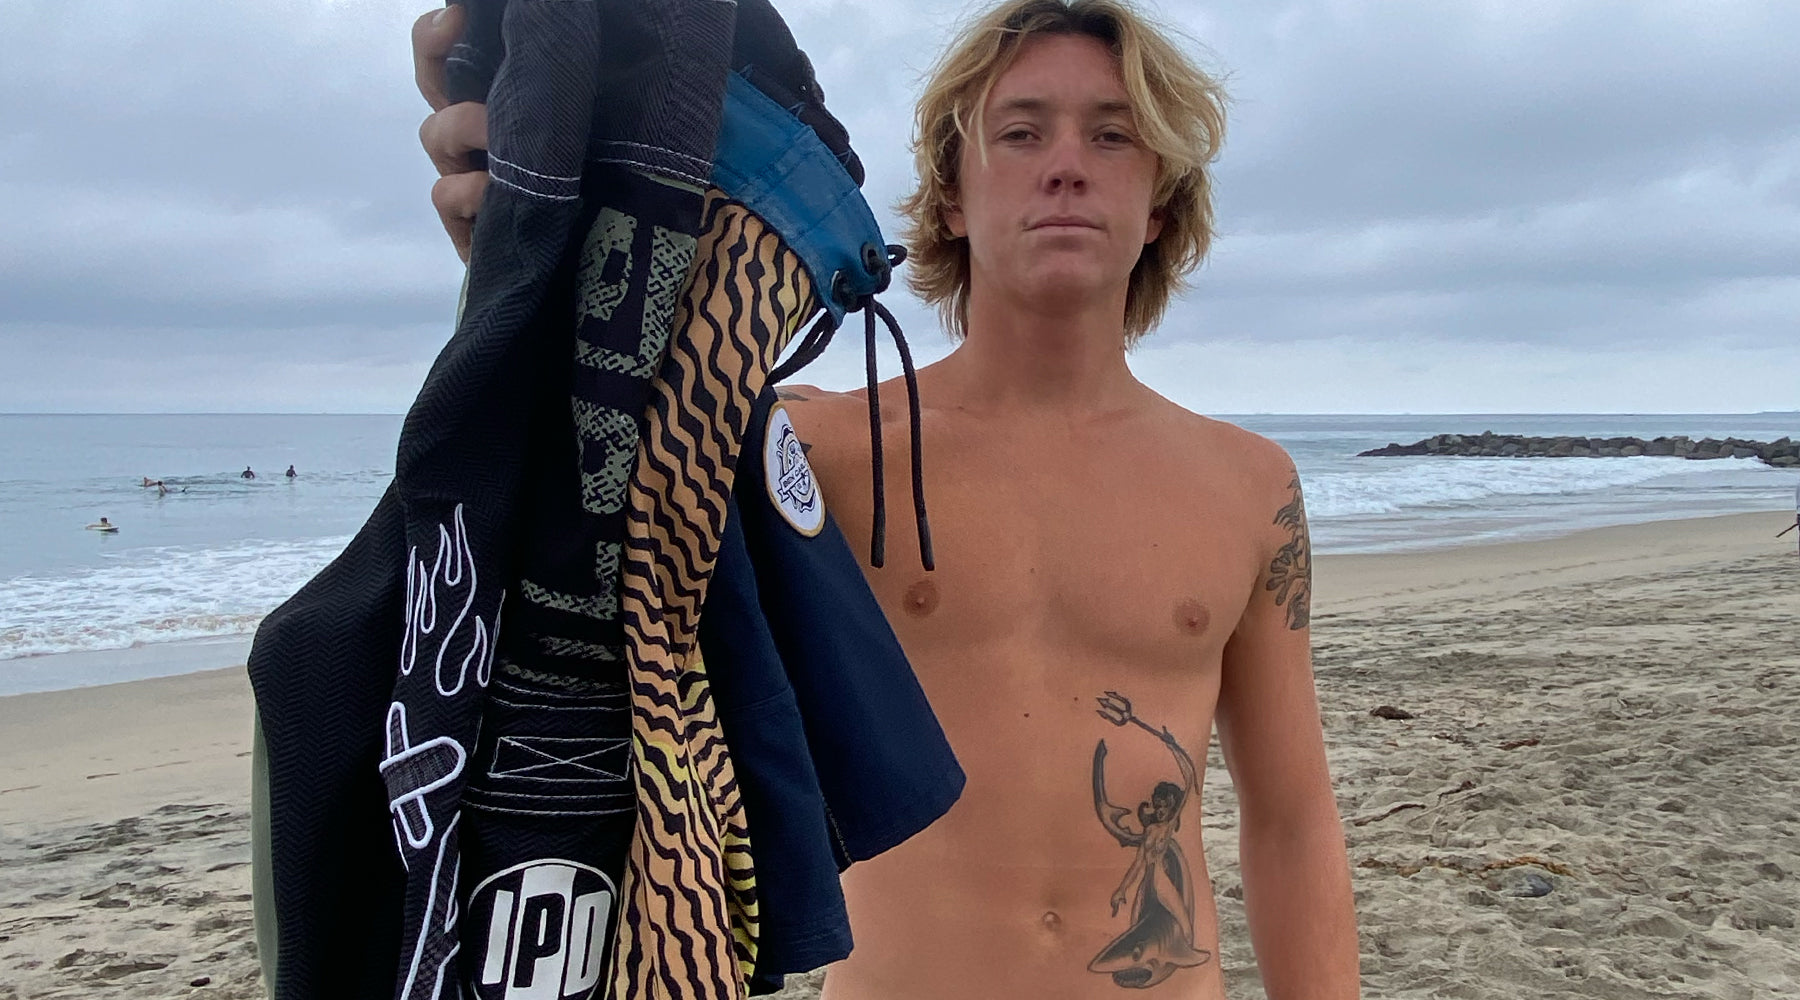 TY BURGESS AND HIS TOP 3 BOARDSHORTS